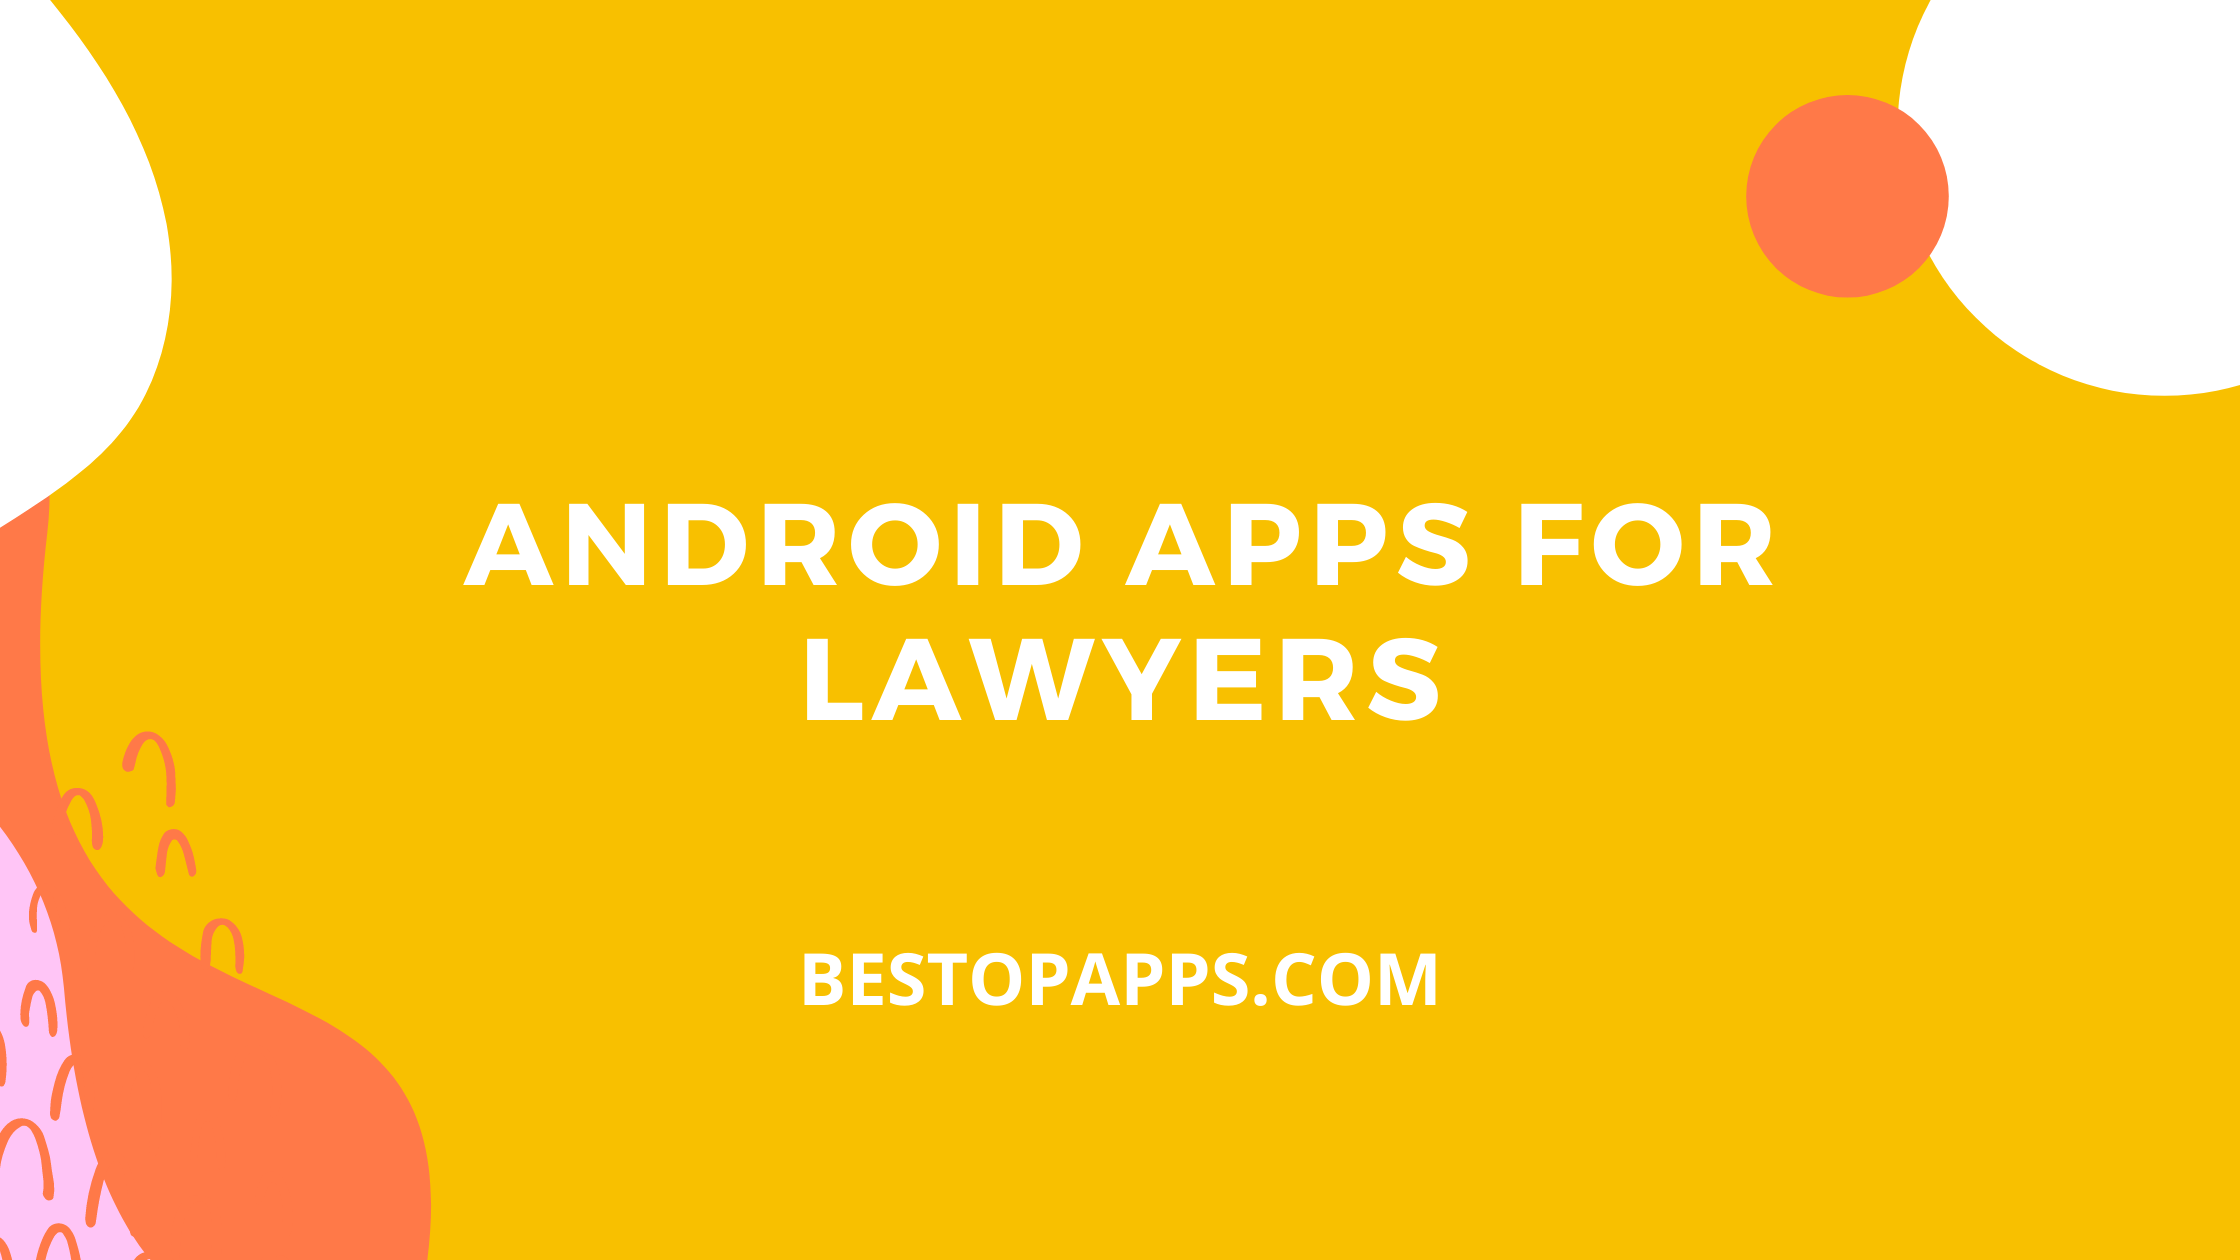 Android Apps for Lawyers